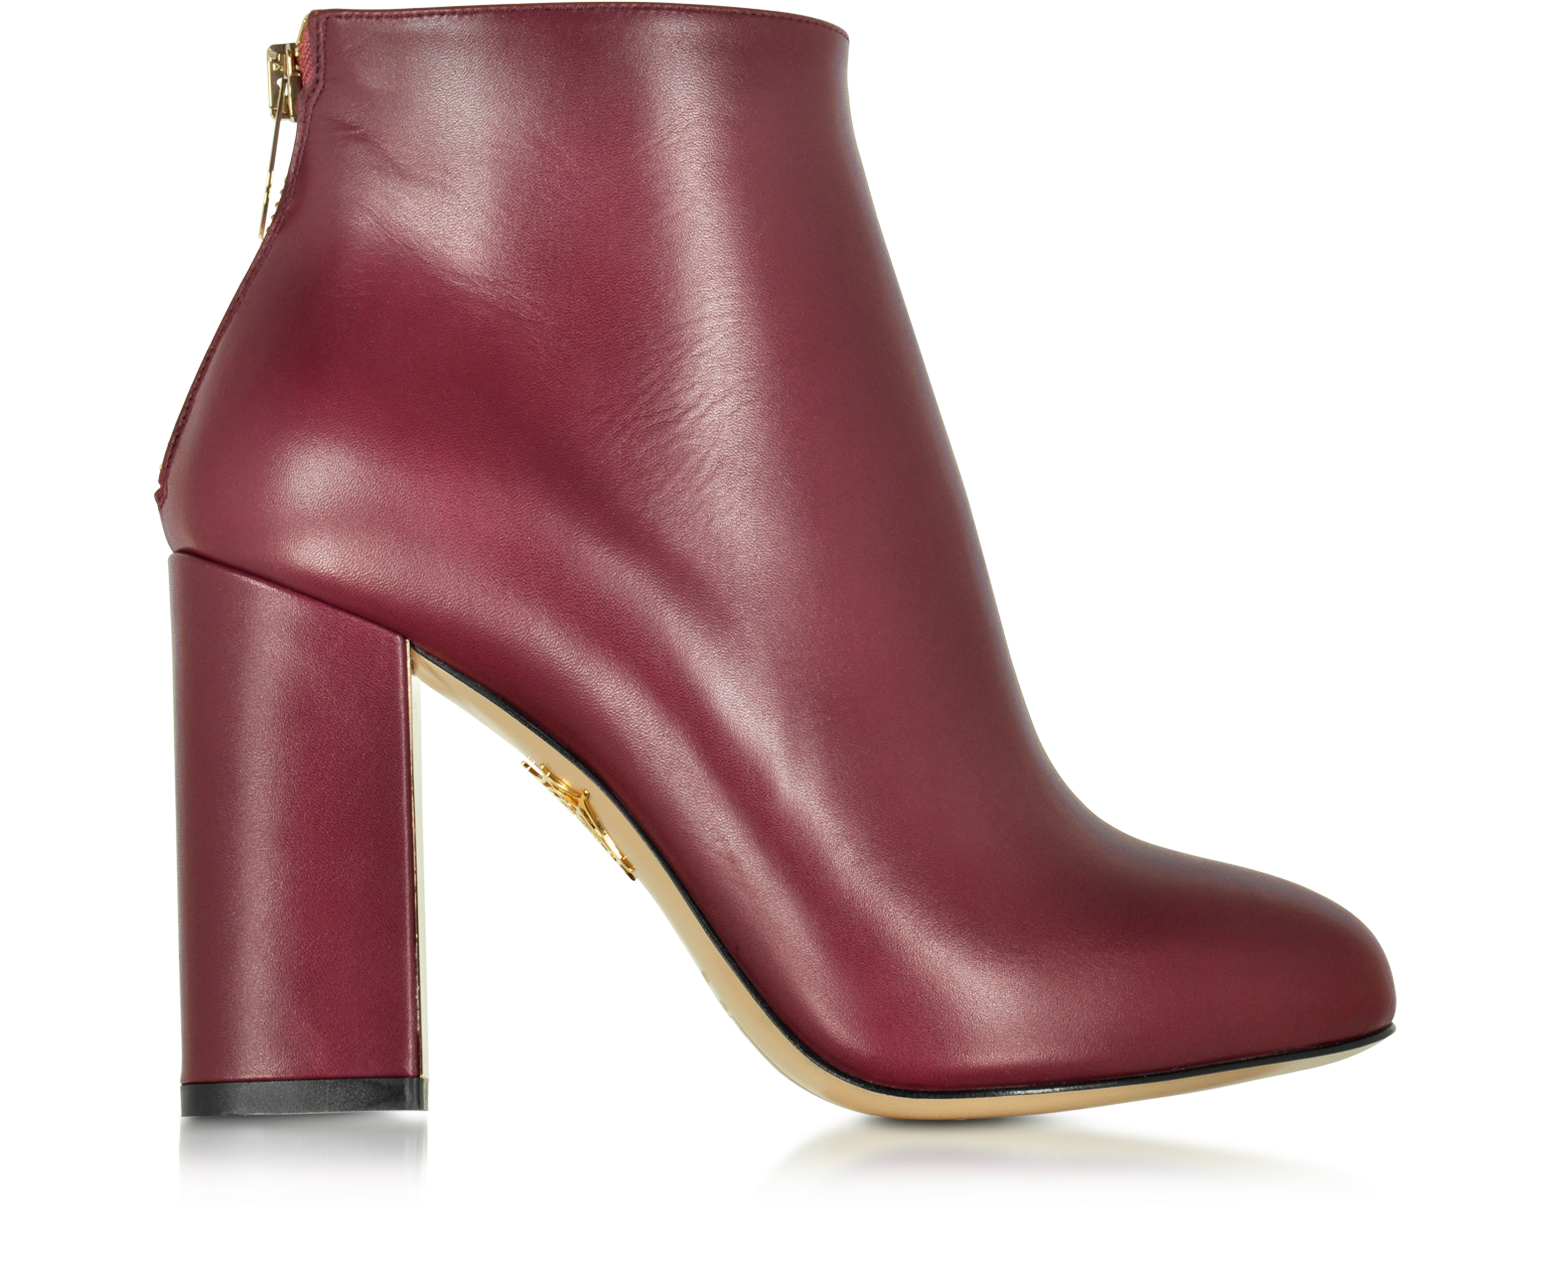 Charlotte Olympia Alba Burgundy Leather Ankle Boot 41 IT/EU at FORZIERI